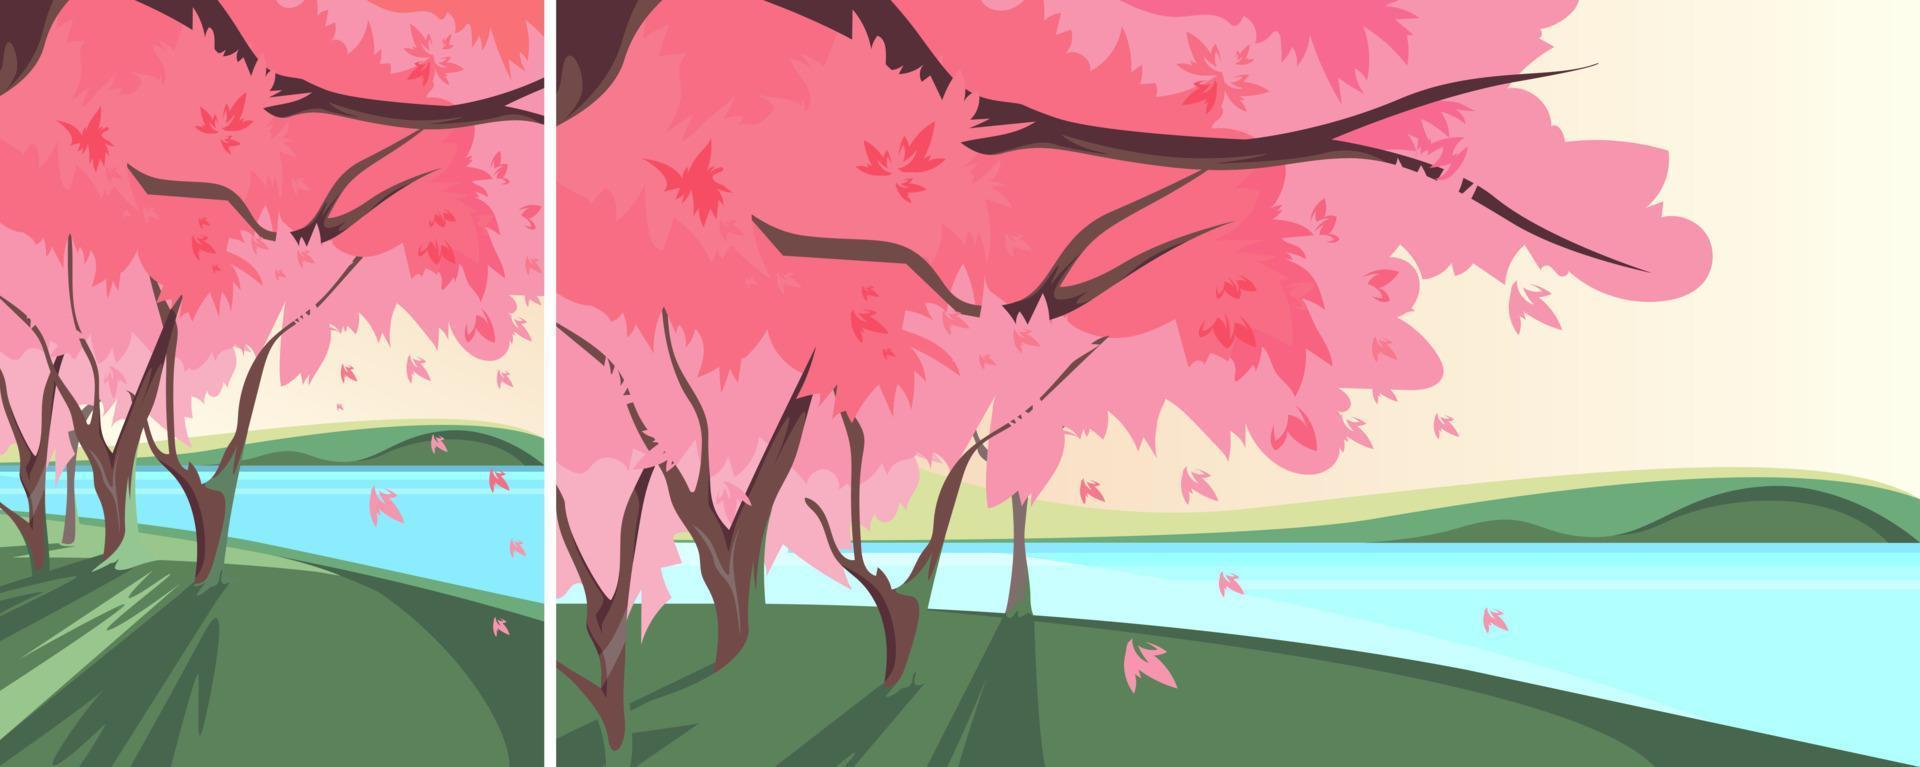 Blooming sakura on river bank. Nature landscape in different formats. vector